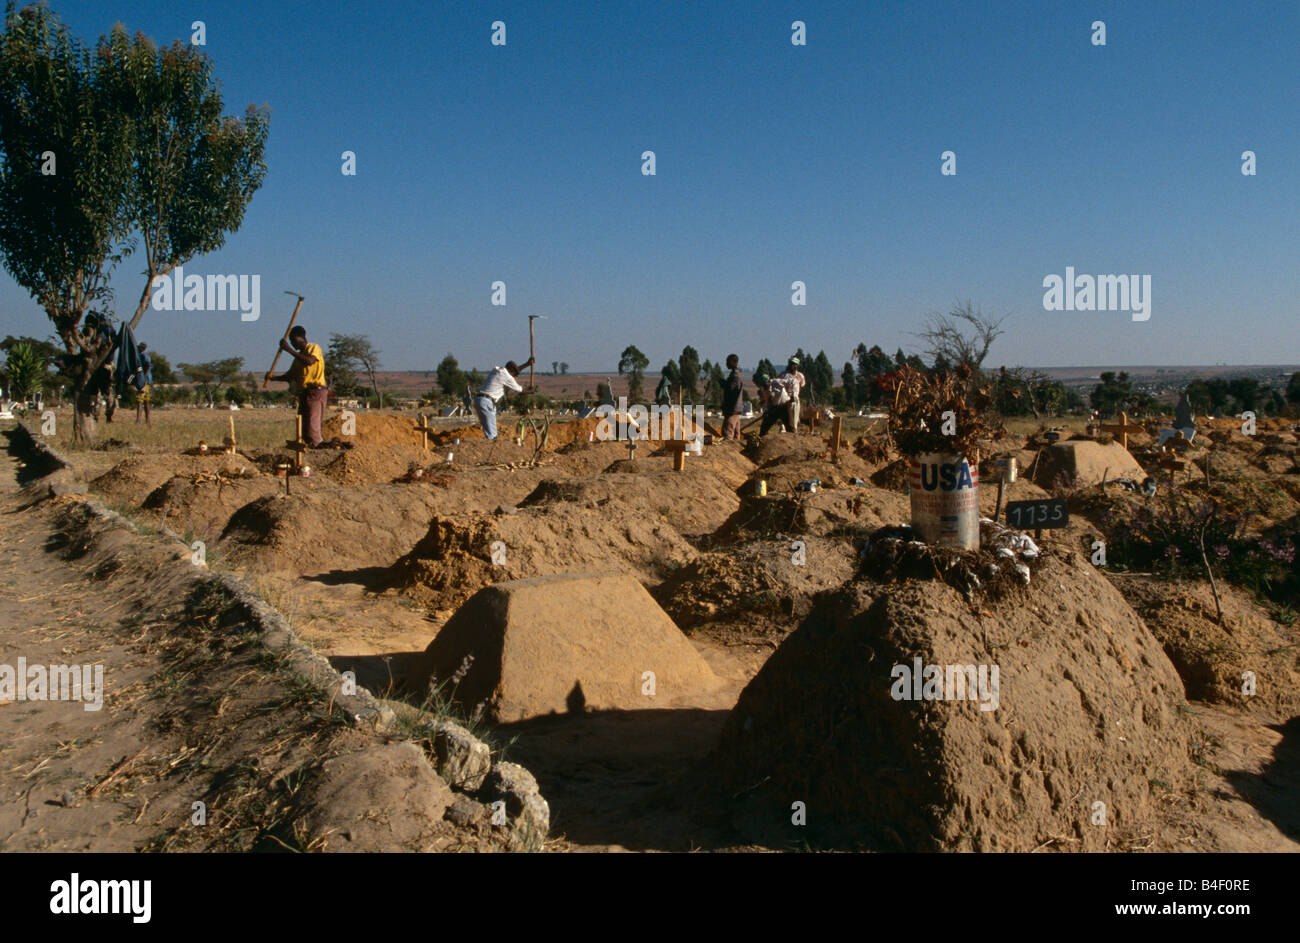 Civil war aftermath, men digging graves in cemetery, Angola, Africa Stock Photo